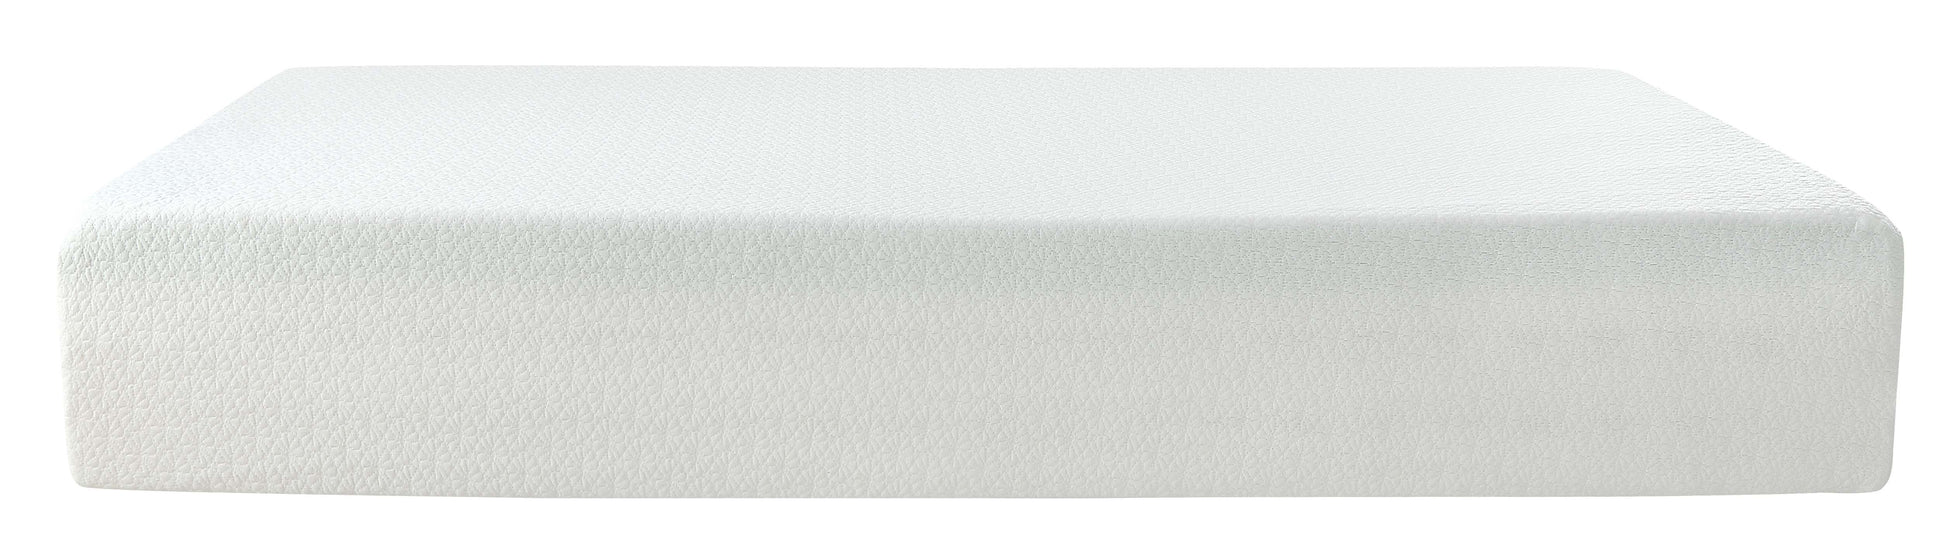 Palermo King Single Mattress 30cm Memory Foam Green Tea Infused CertiPUR Approved - image5